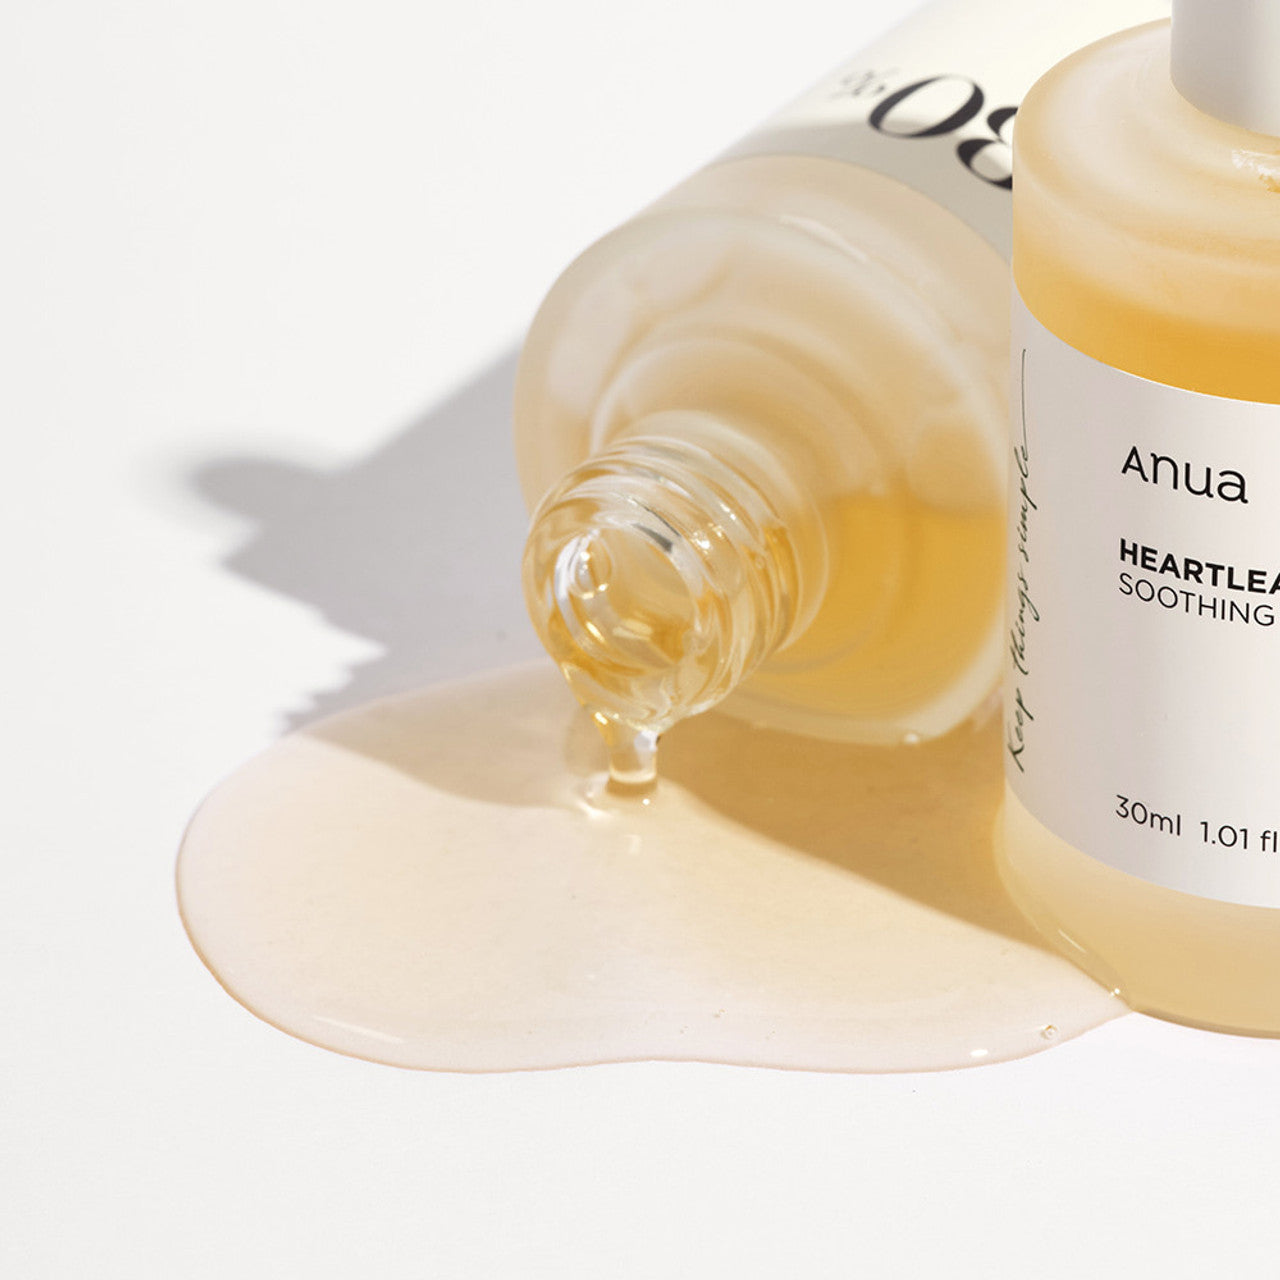 Anua Heartleaf 80% Soothing Ampoule 30ml